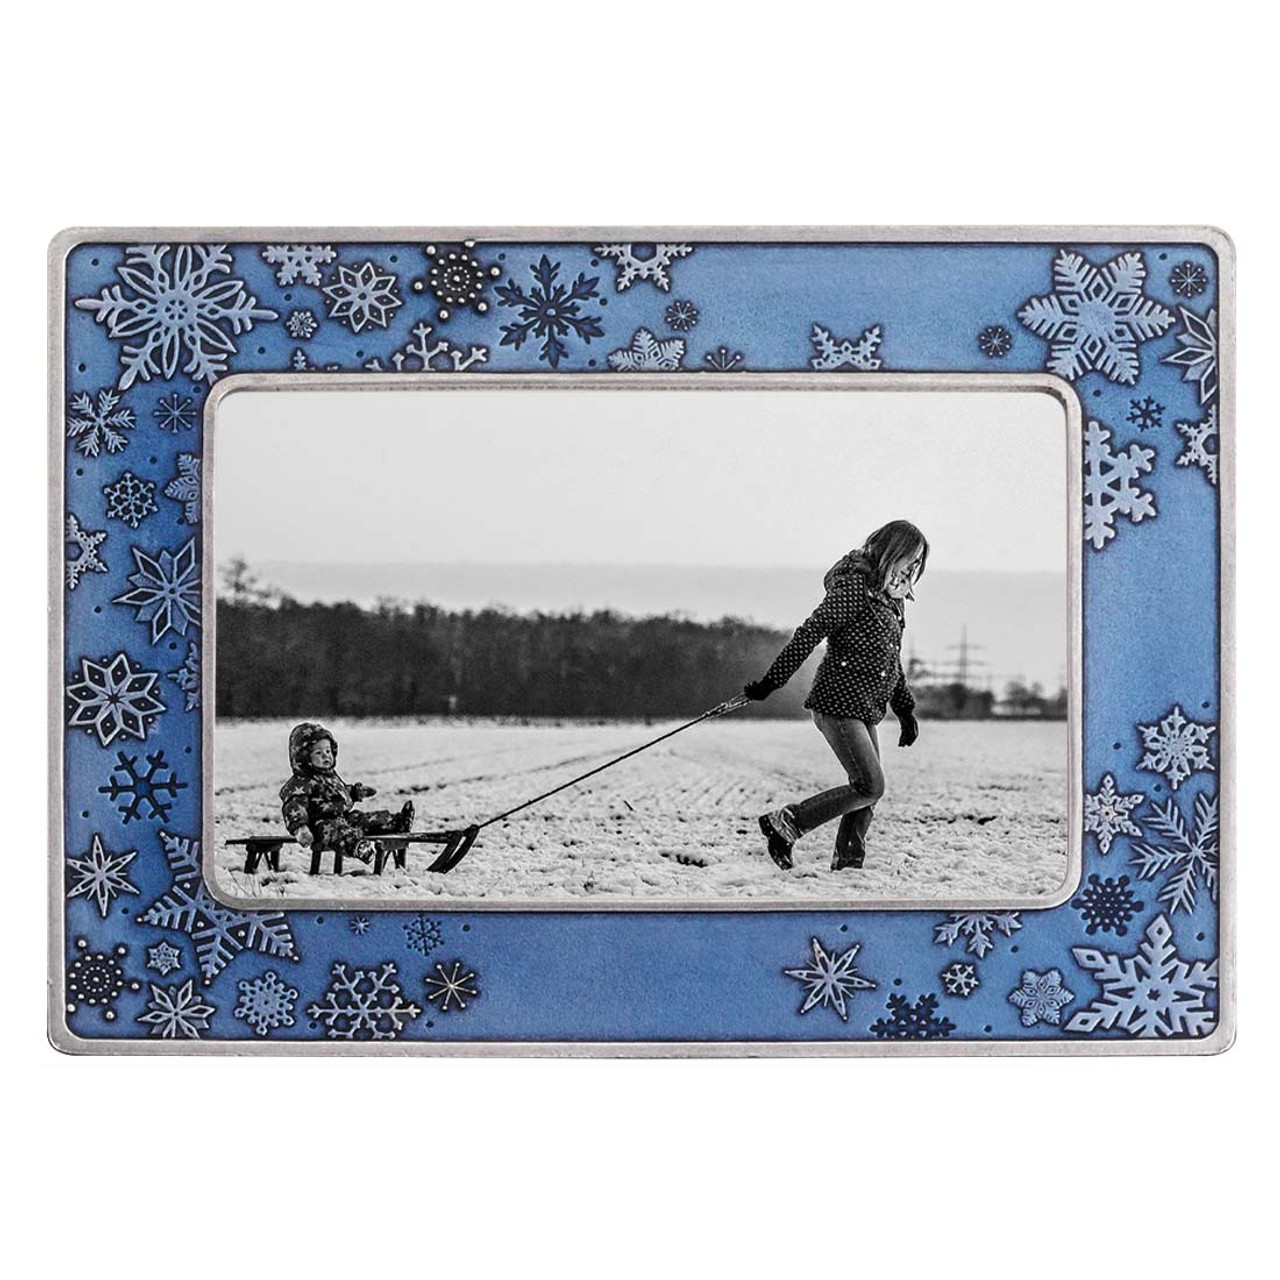 Federal / Blue 4x6 Frame - Danforth Pewter - Made in USA